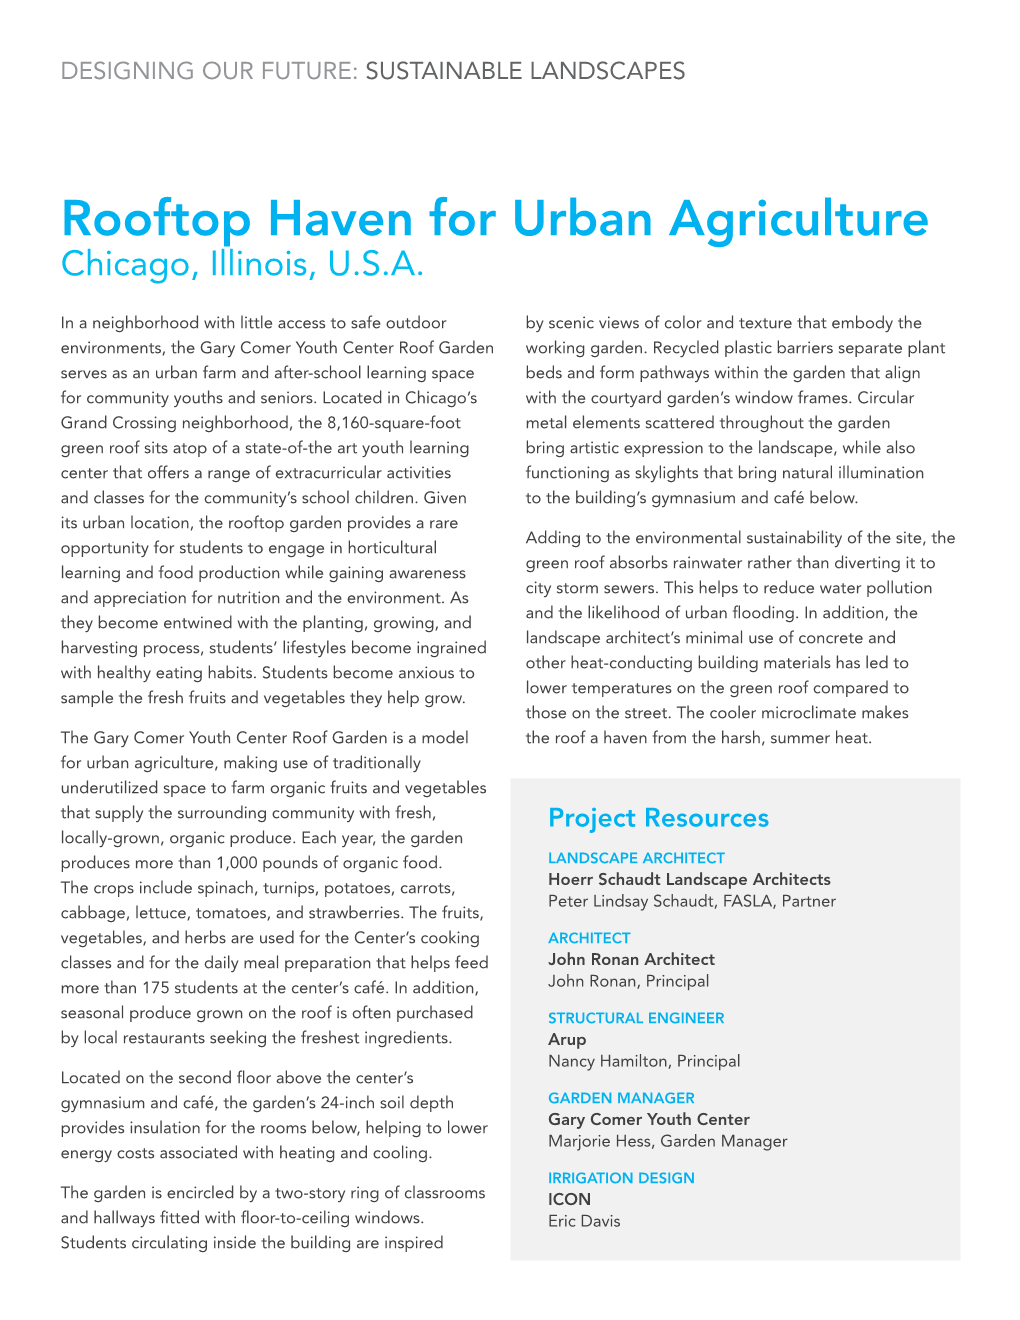 Rooftop Haven for Urban Agriculture Chicago, Illinois, U.S.A